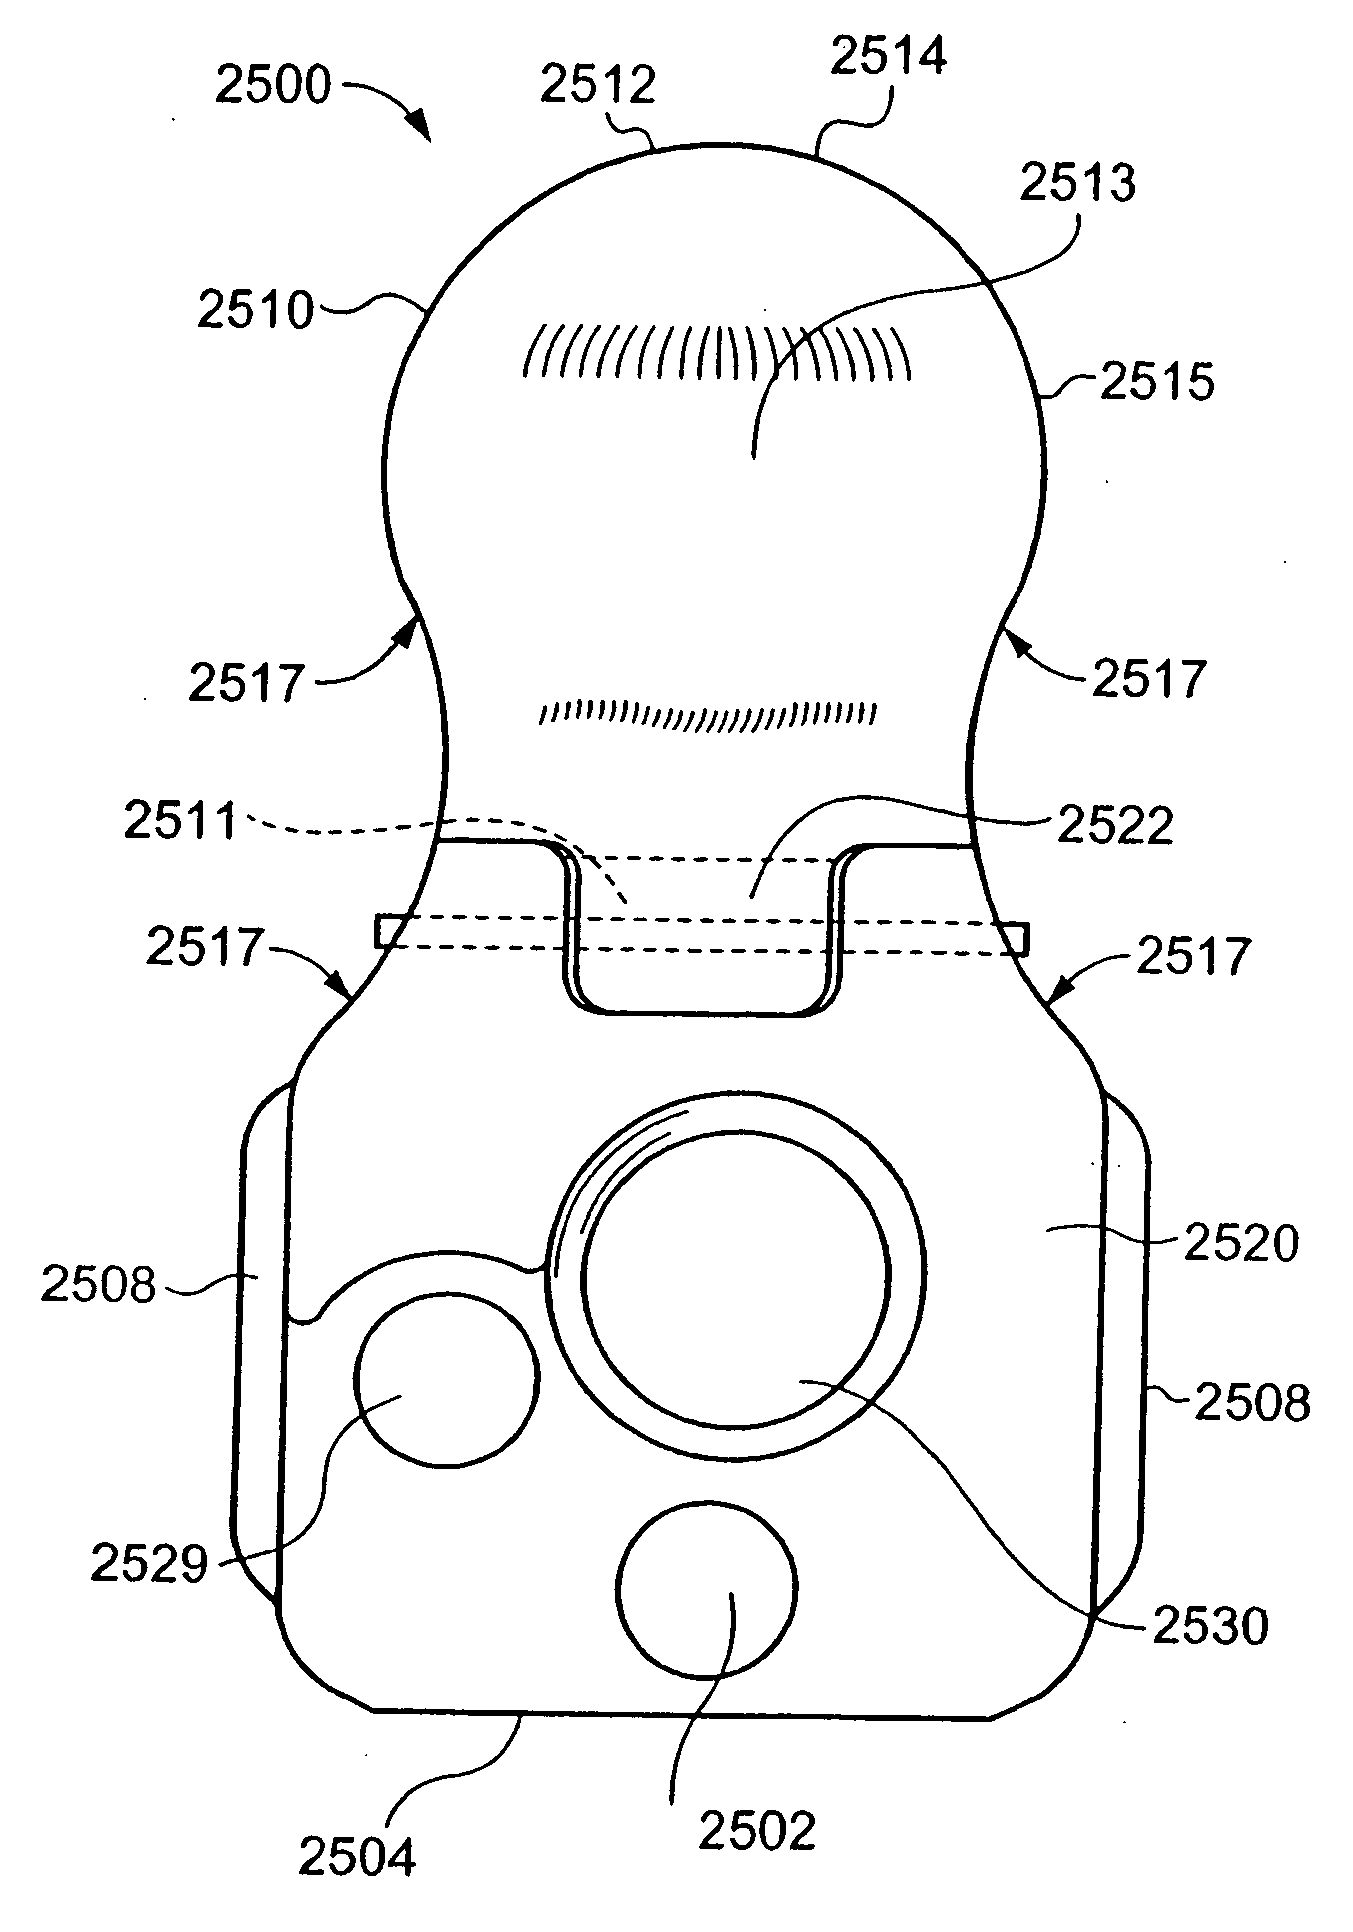 Inter-cervical facet implant with implantation tool